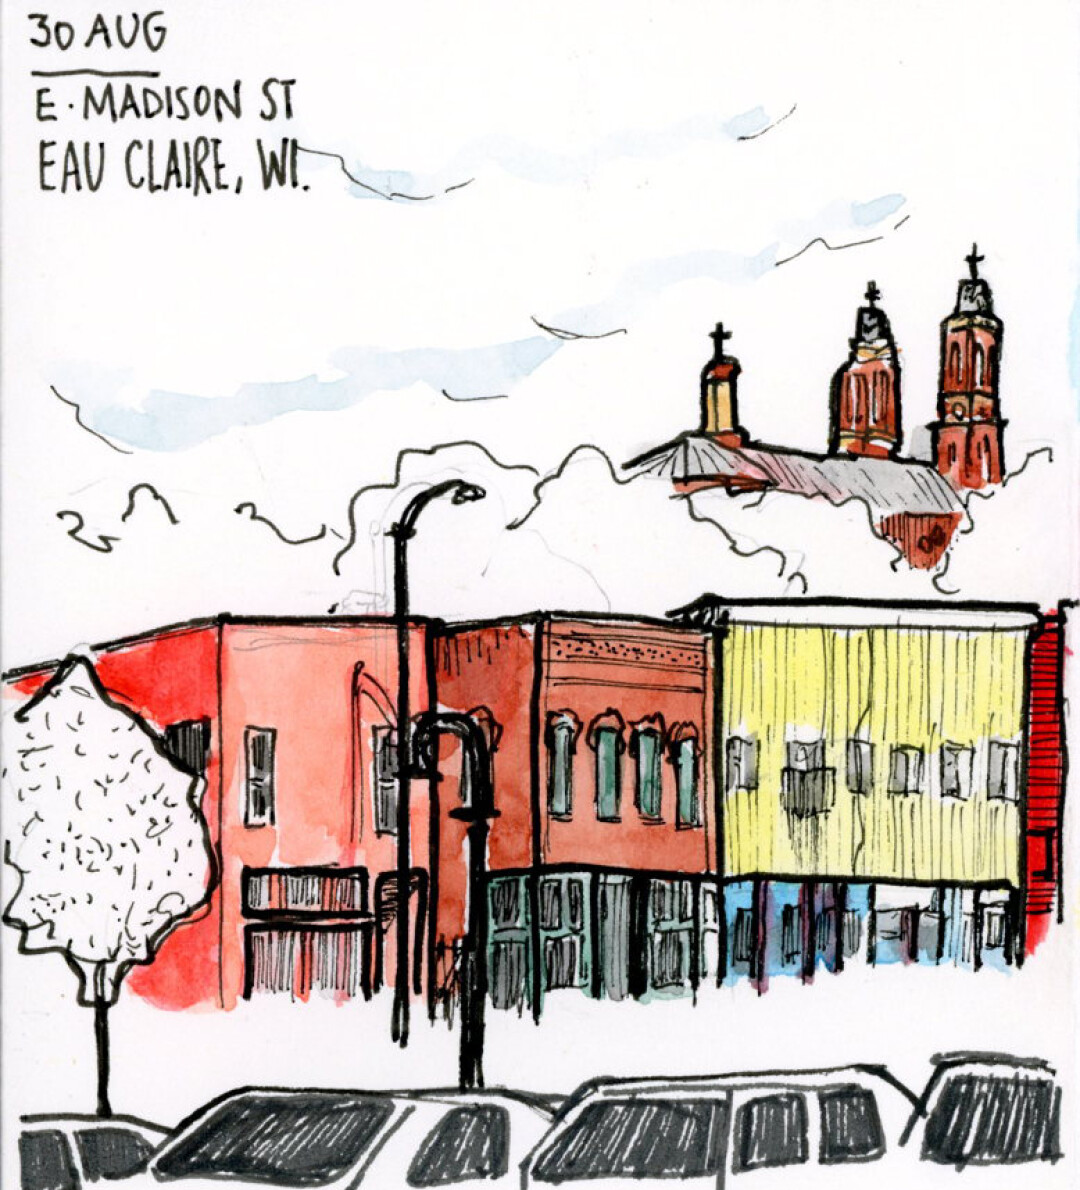 SNEAKING AROUND DOWNTOWN. Artist Nishant Jain has created numerous “Sneaky Art” pen-and-ink sketches of Eau Claire people and scenes. Now he’s compiled them in a book, Sneaky Art of Eau Claire.